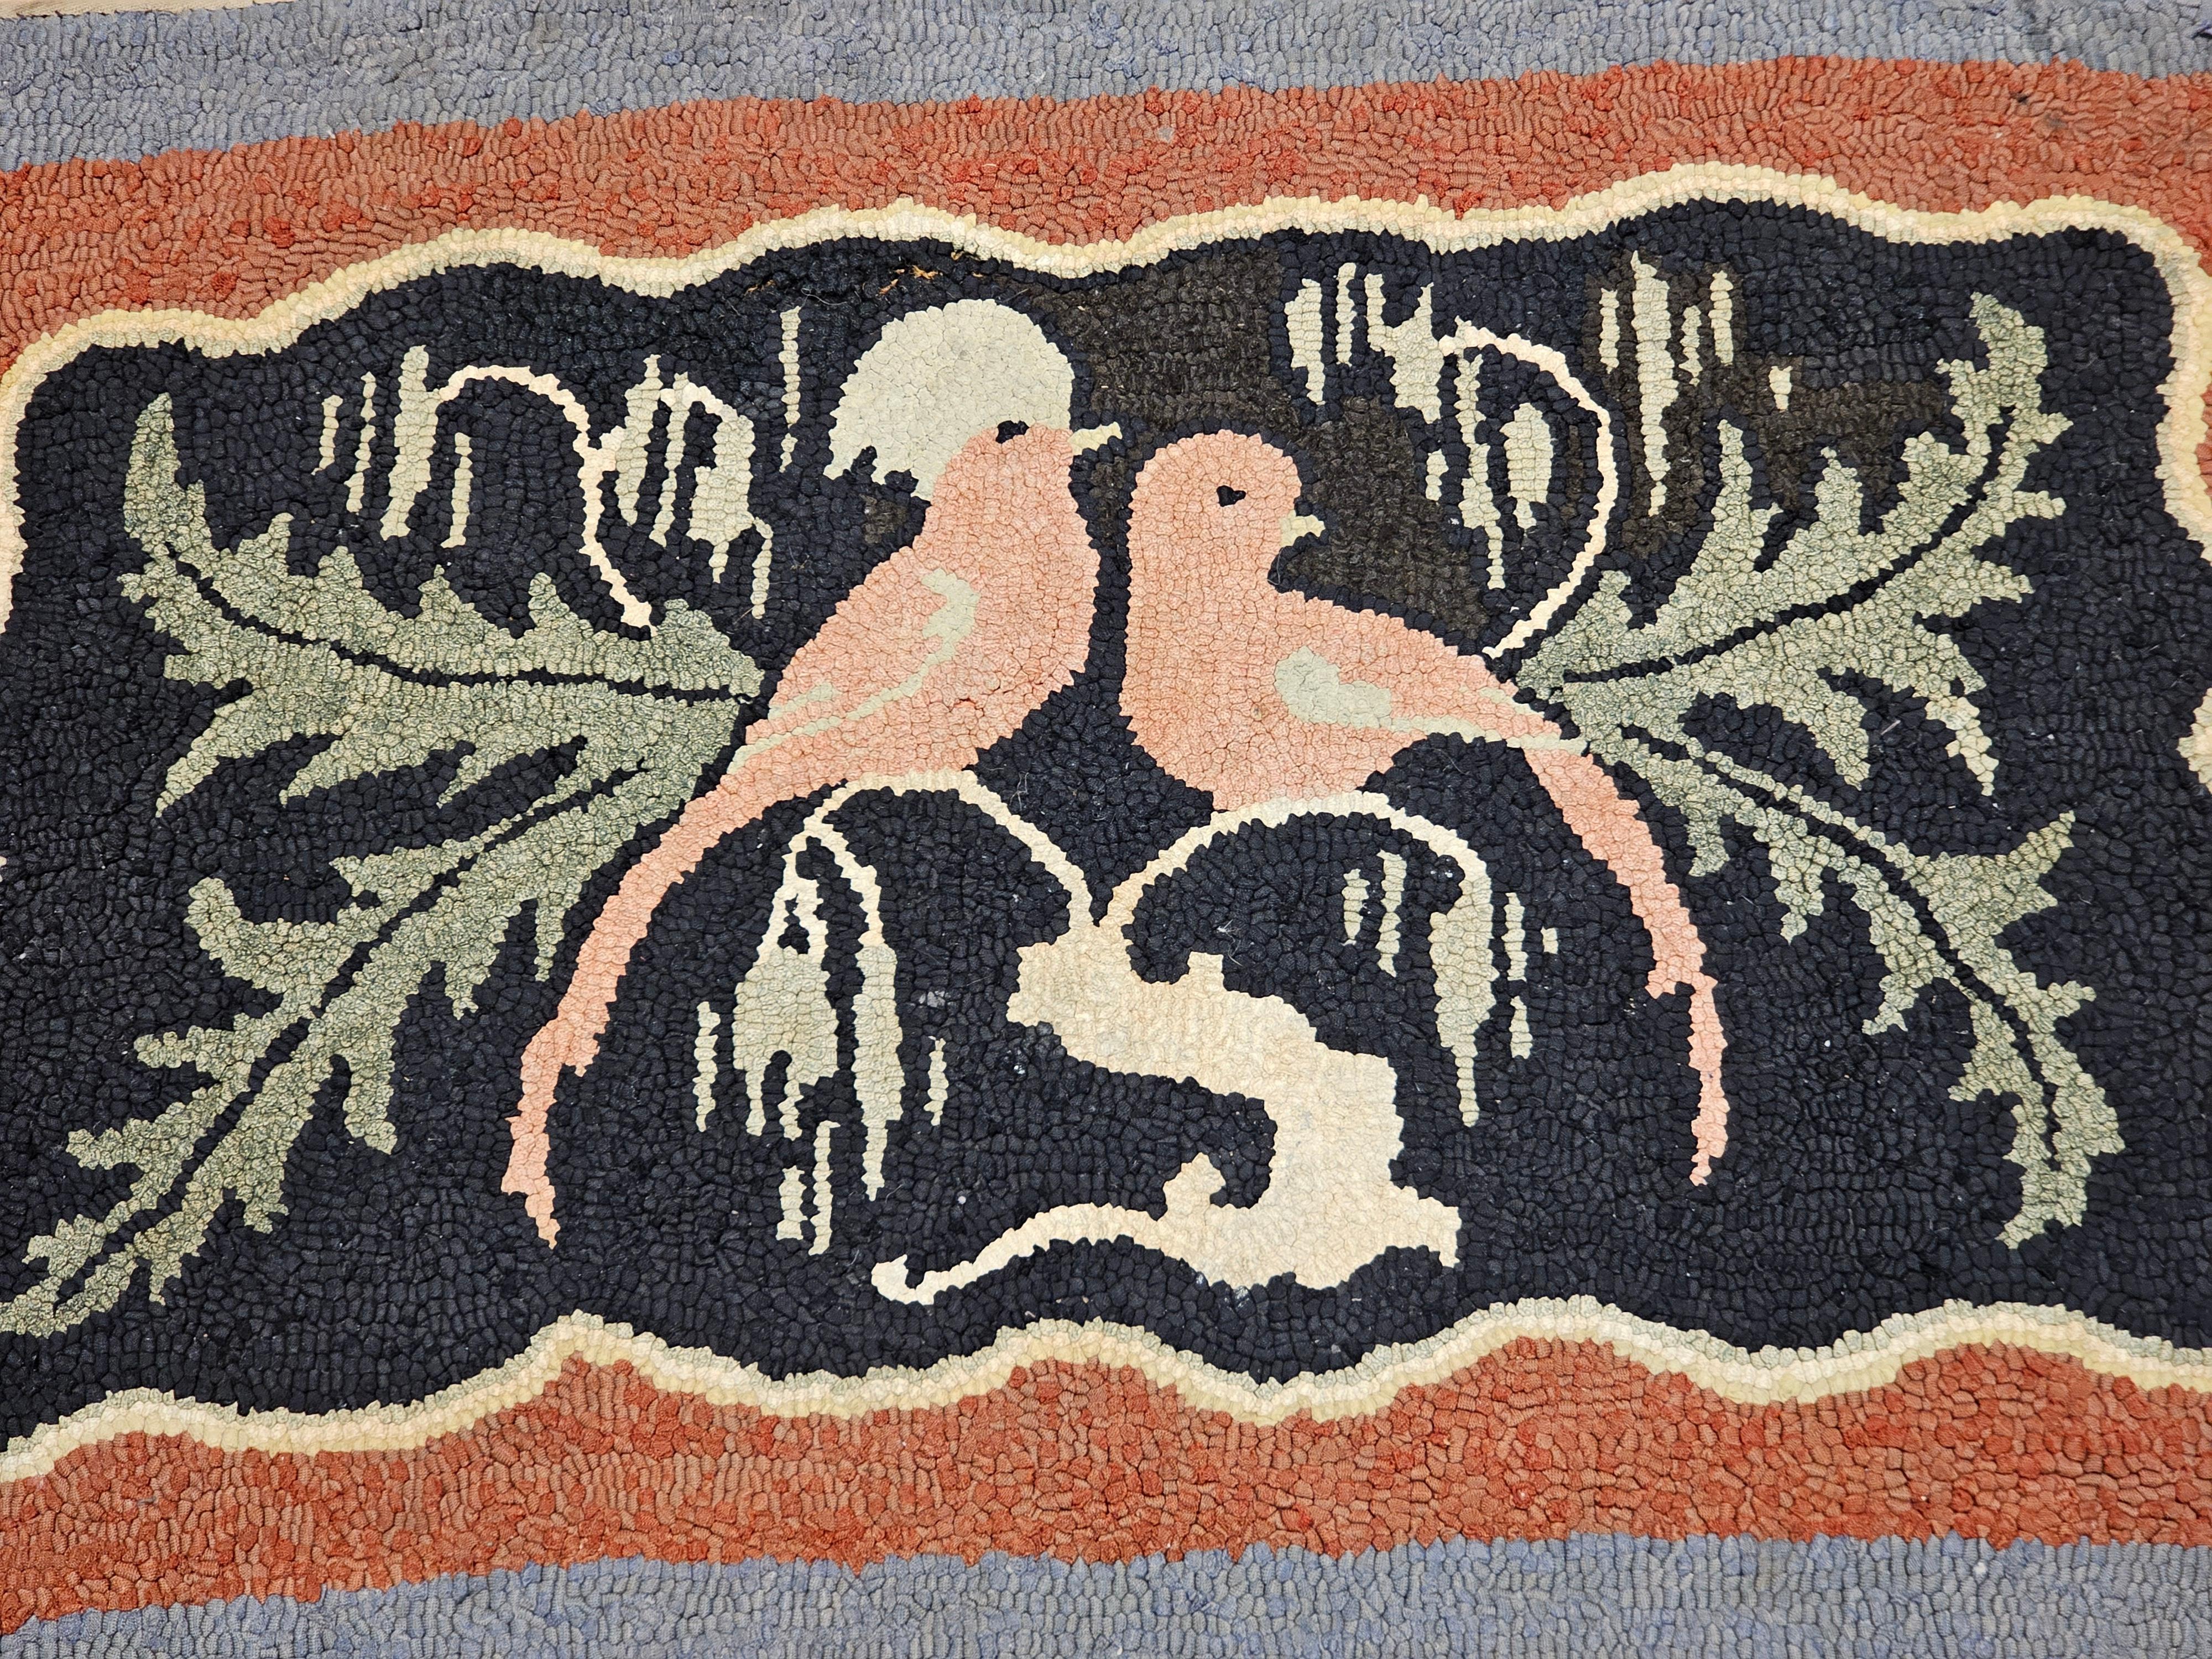 Vintage American Hand Hooked Rug of Two Love Birds in a Tree in Black, Brown In Good Condition For Sale In Barrington, IL